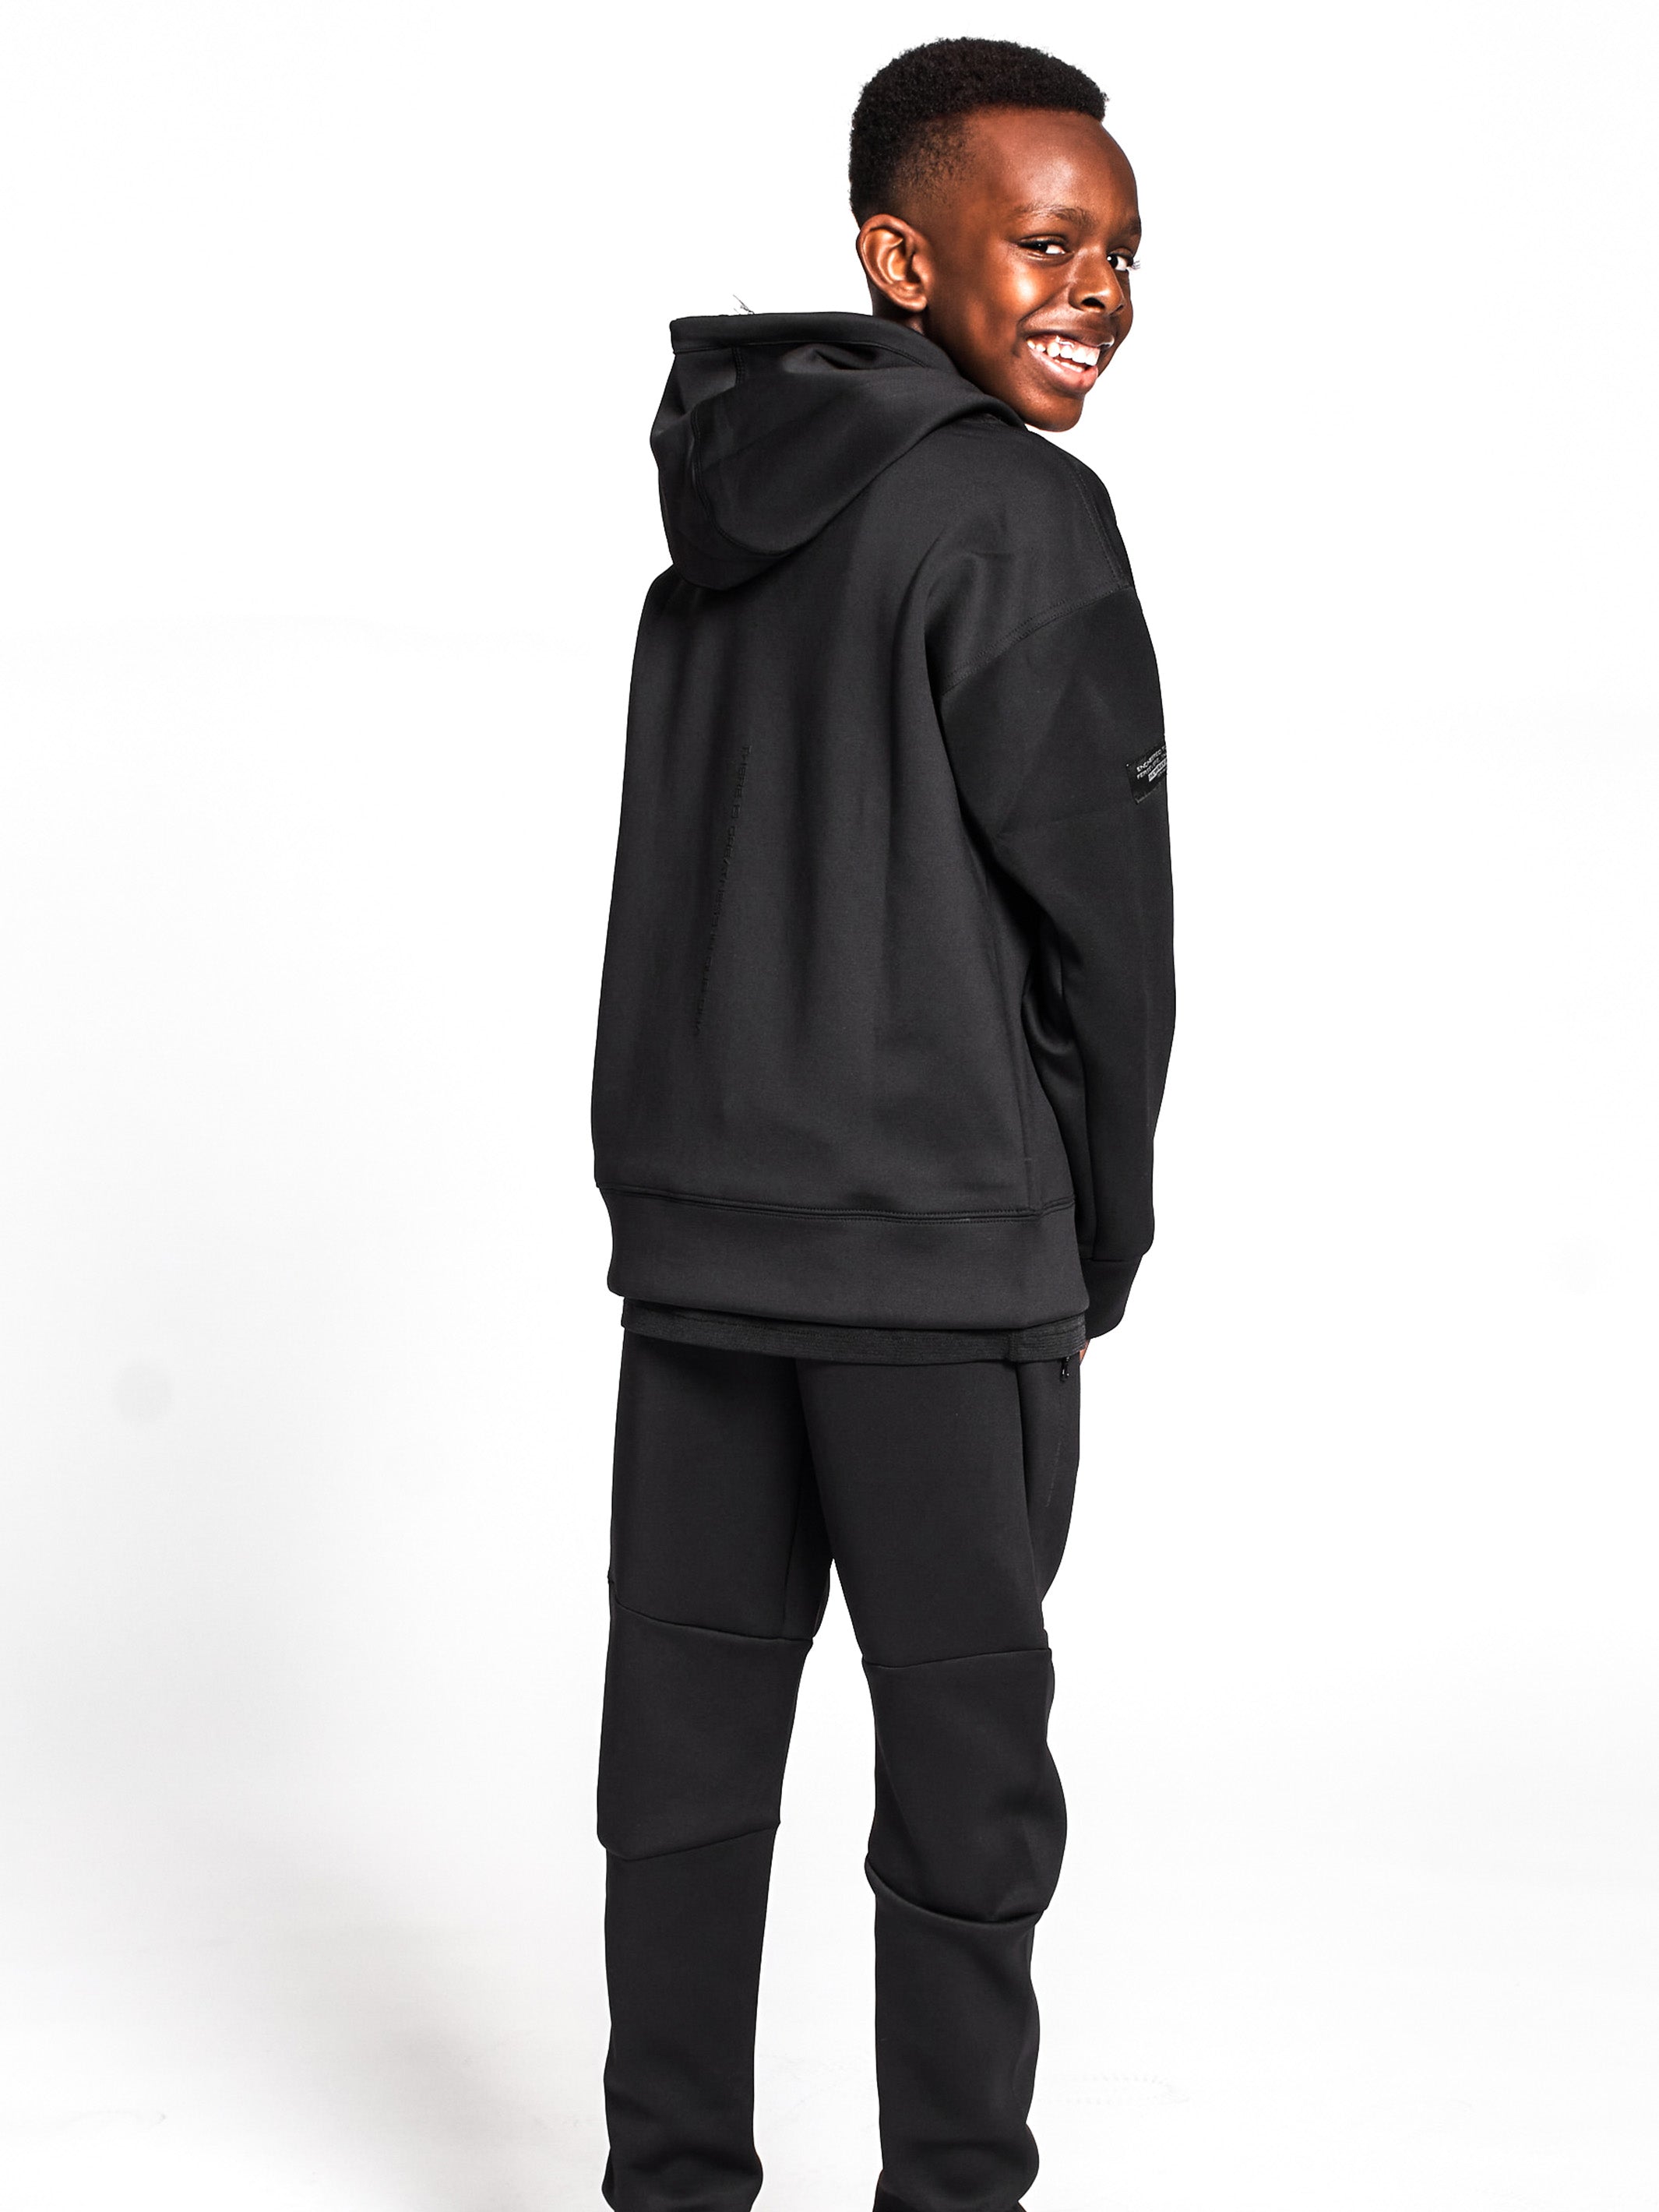 Youth Actively Black Performance Tech Hoodie